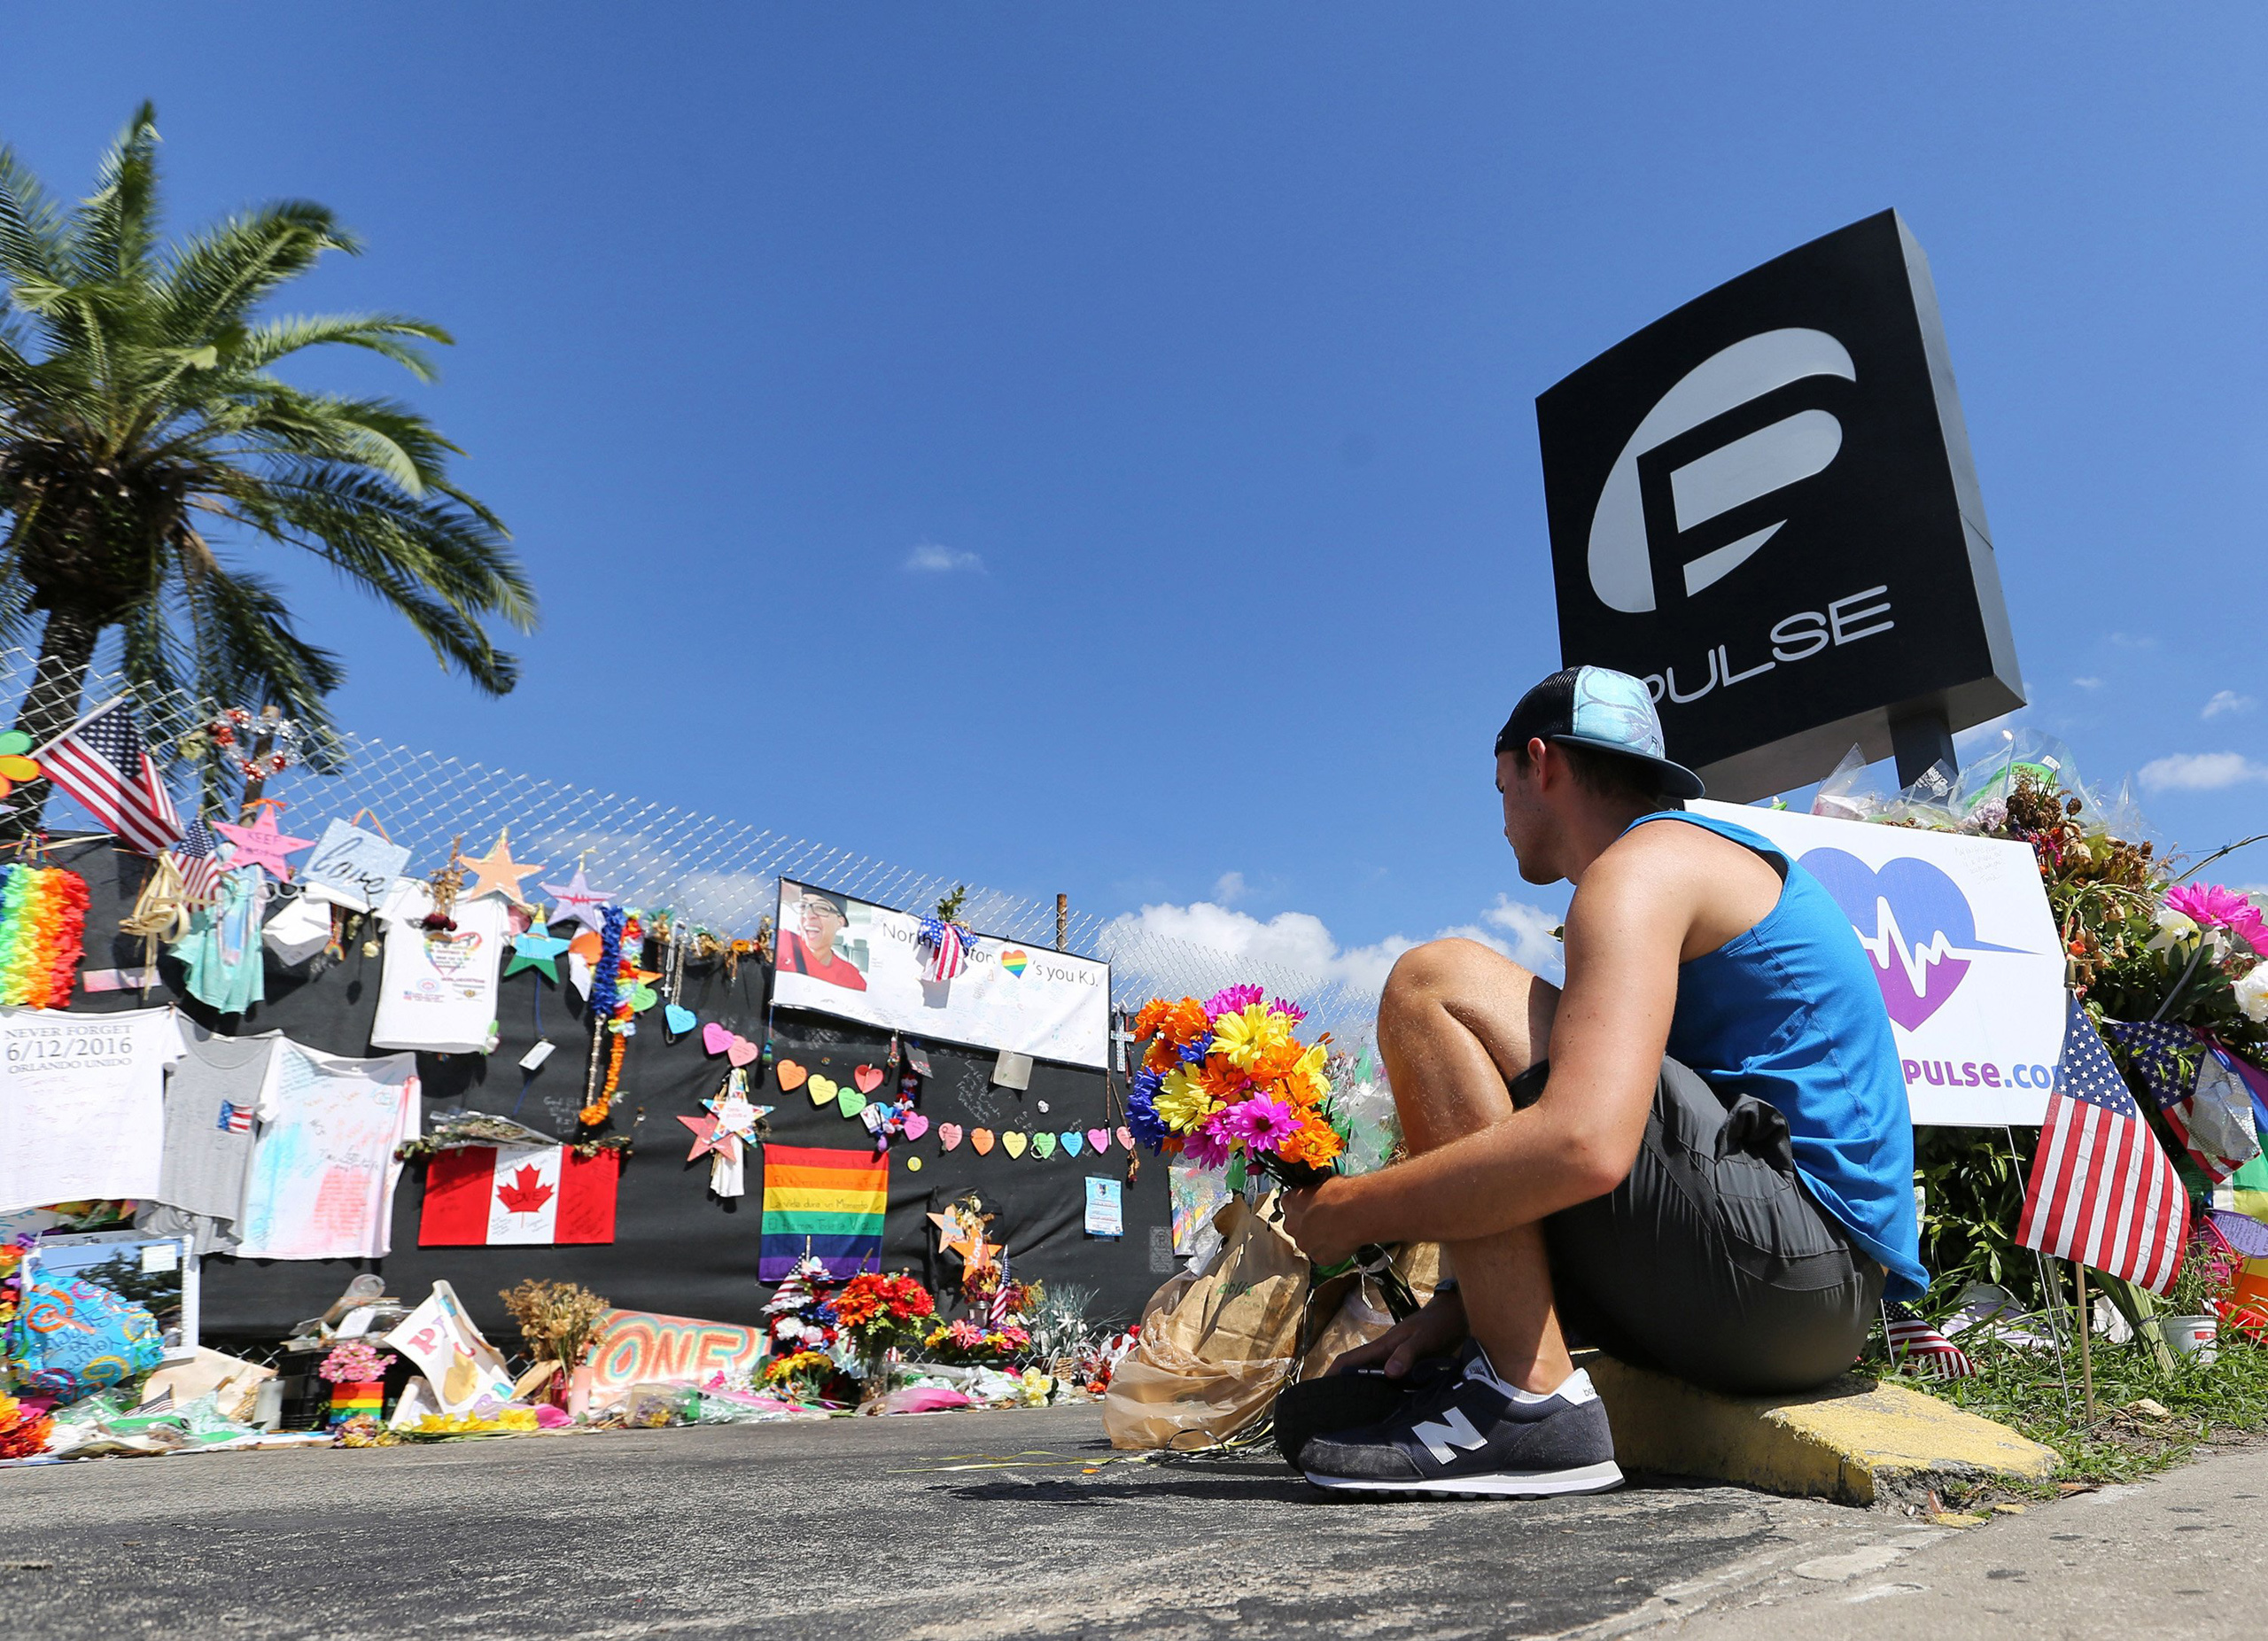 os-orlando-pulse-shooting-one-month-later